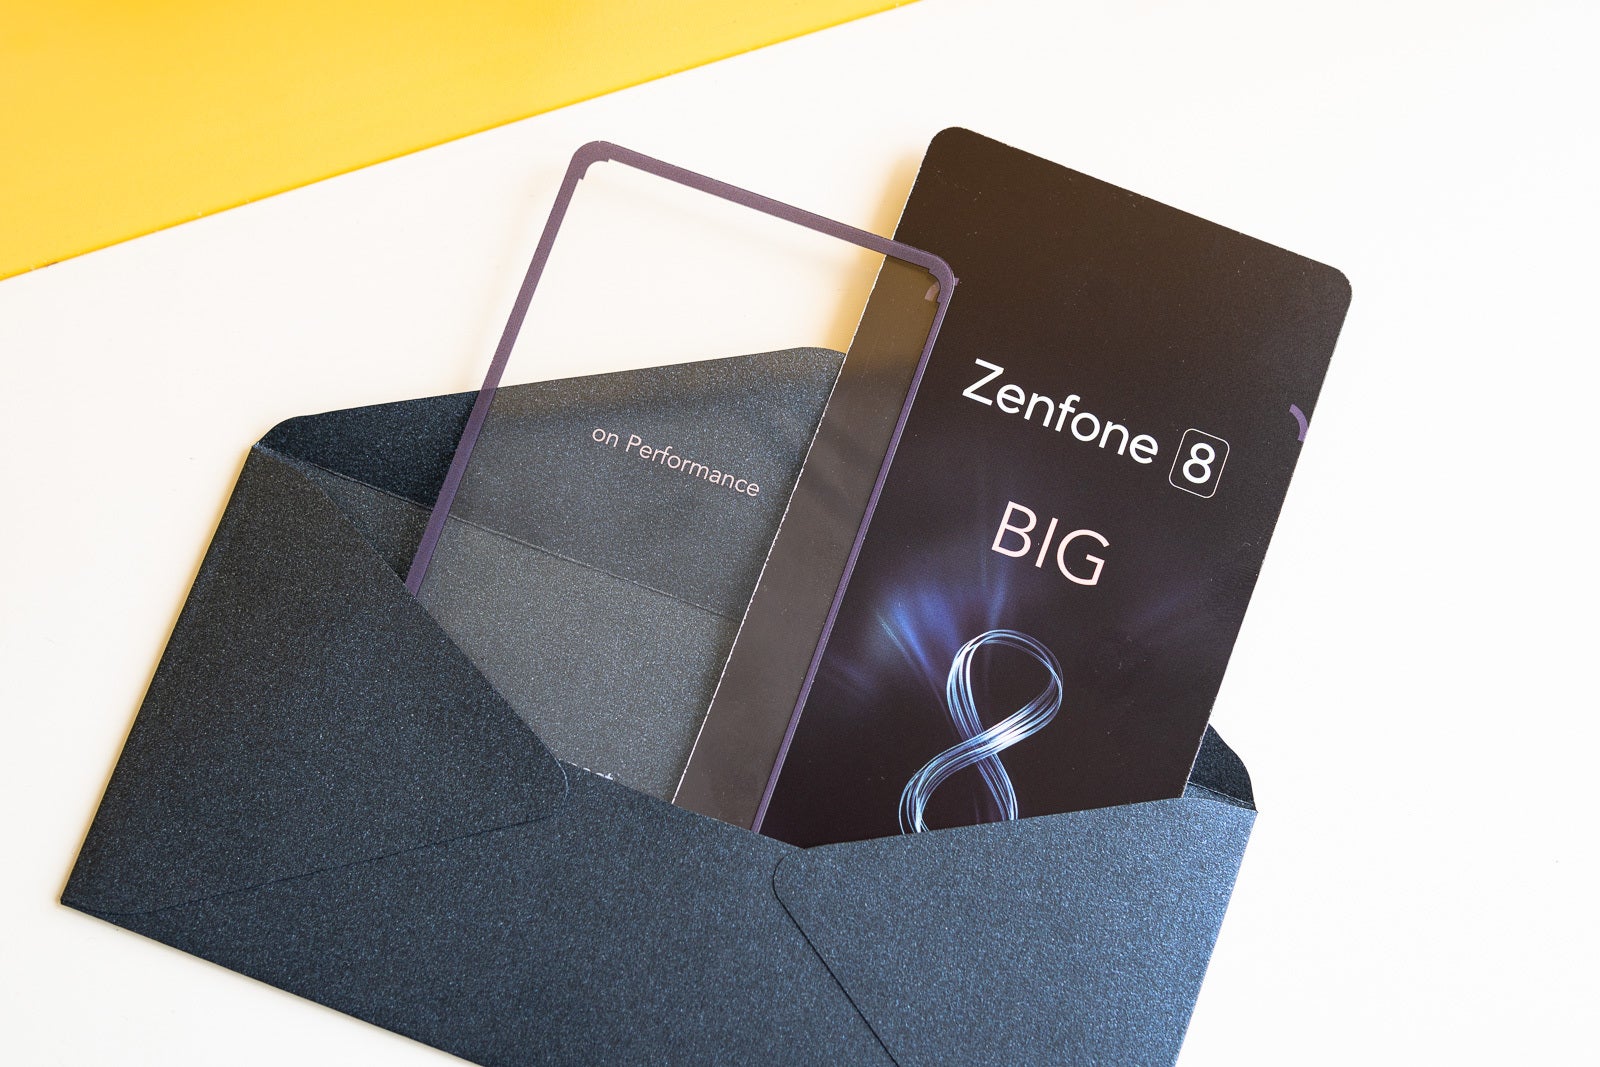 Asus teases compact yet powerful Zenfone 8 with a cute invite